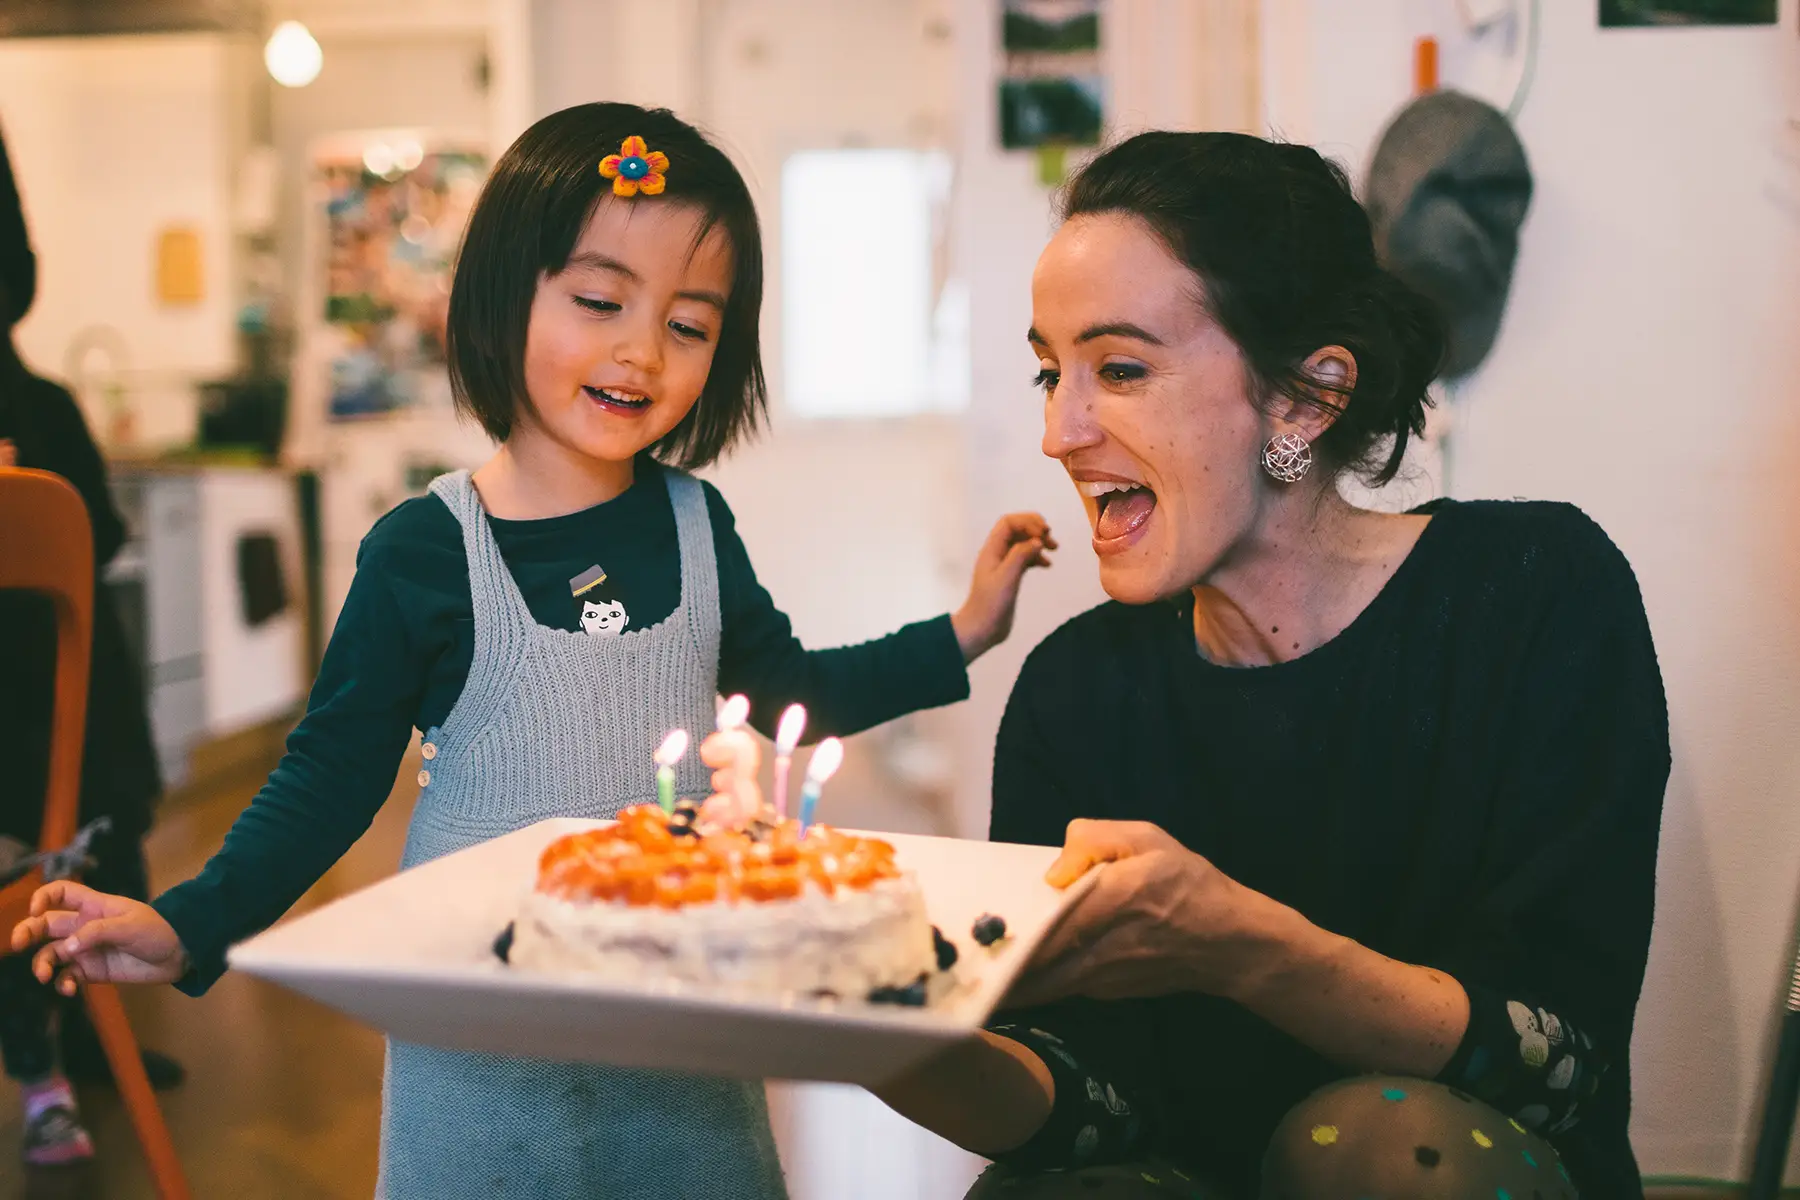 A child blowing out candles on a cake while an adult holds the cake up for them